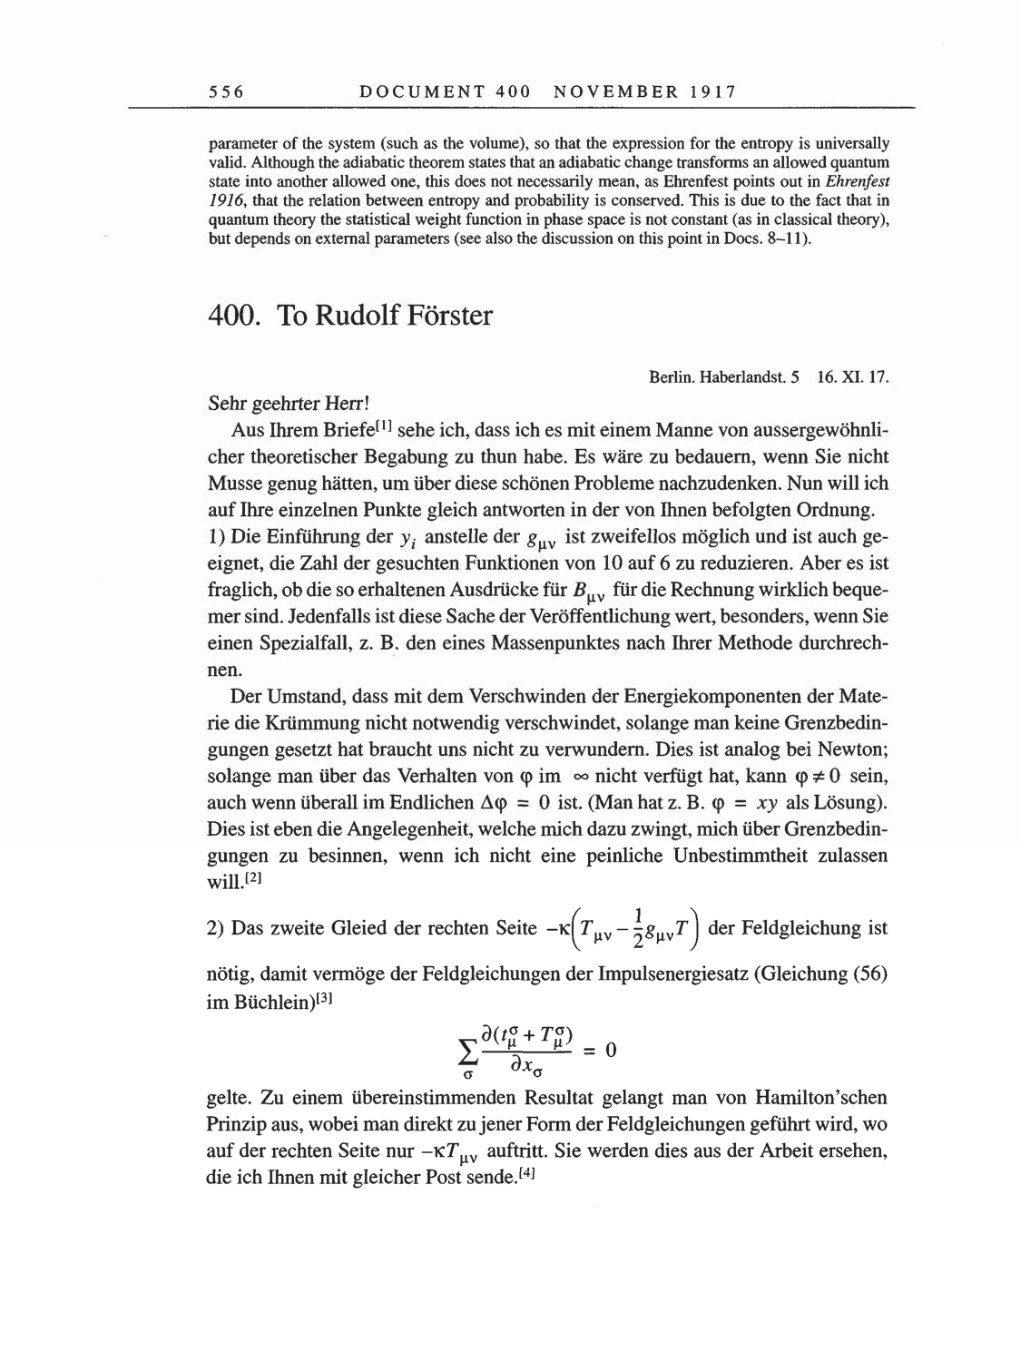 Volume 8, Part A: The Berlin Years: Correspondence 1914-1917 page 556